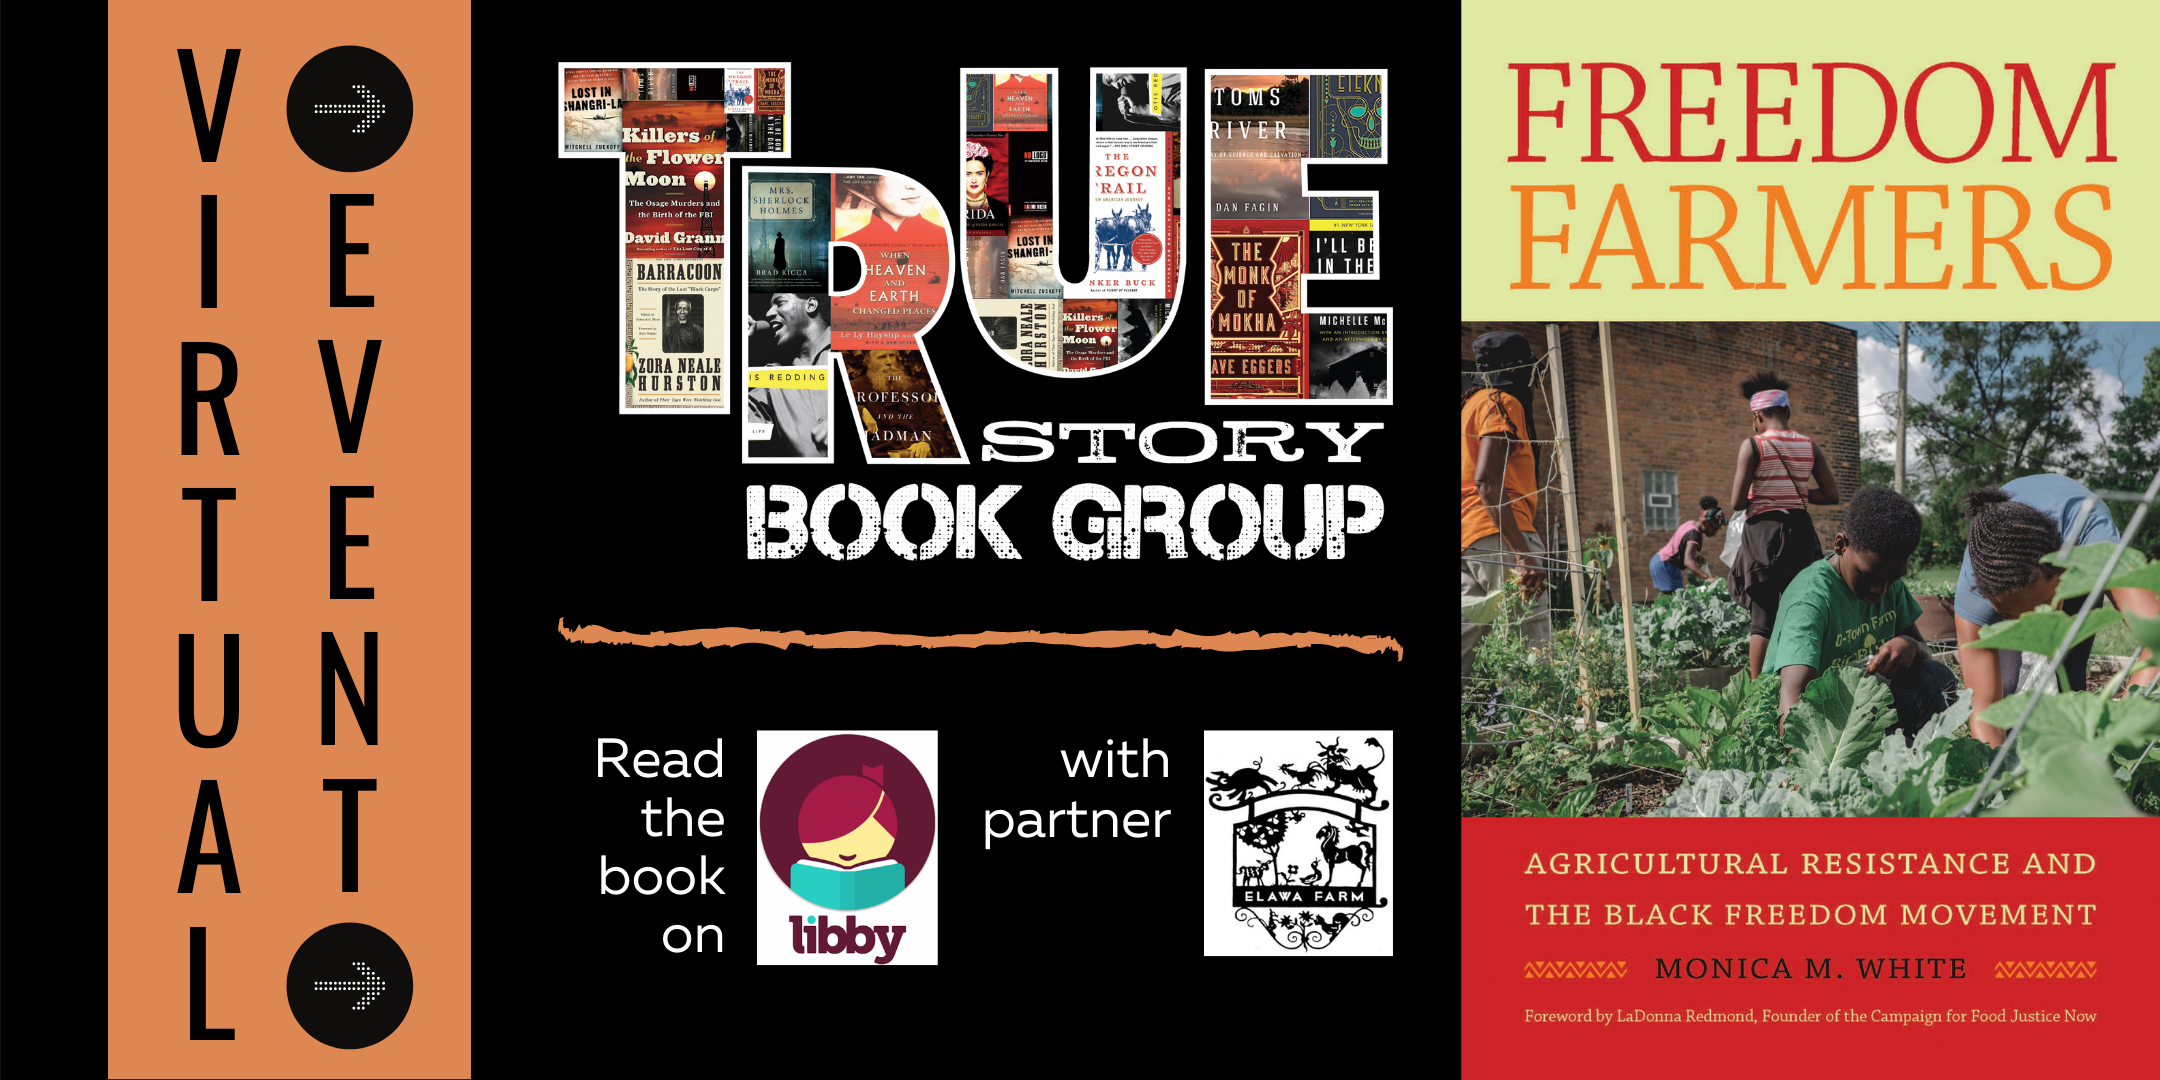 True Story Book Group: Freedom Farmers